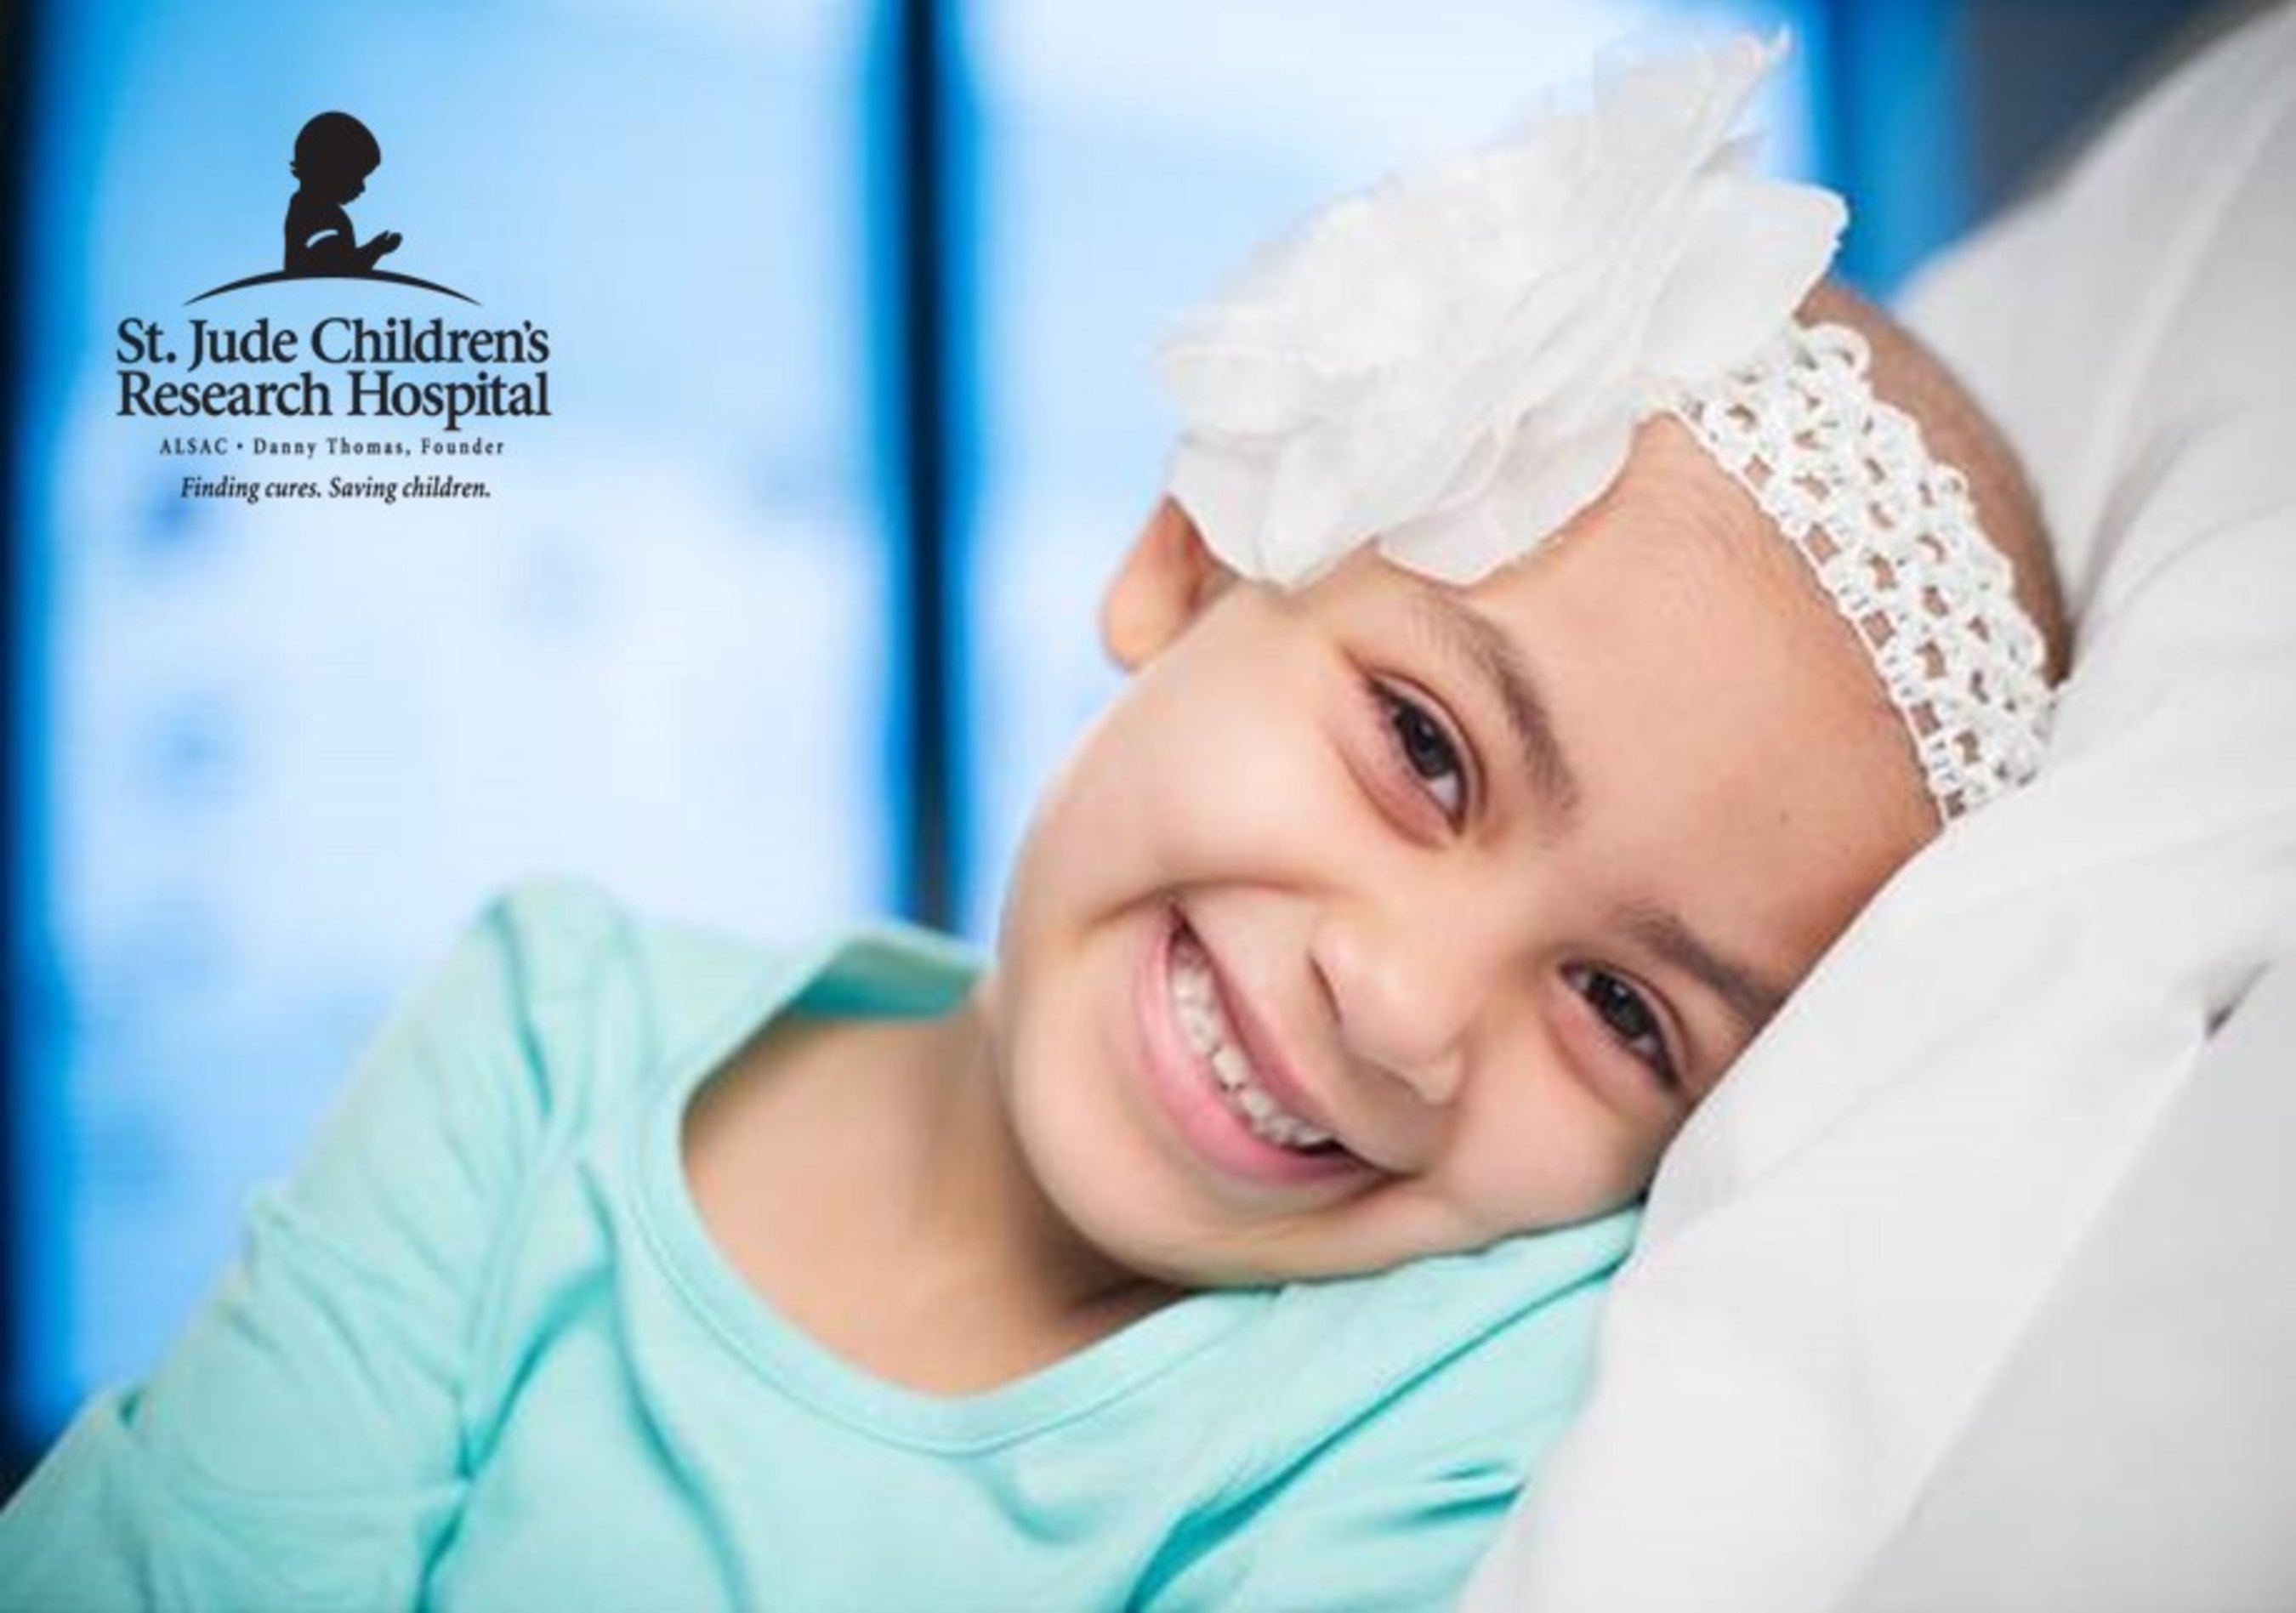 Radio stations support St. Jude Children's Research Hospital  patients like Angelica.